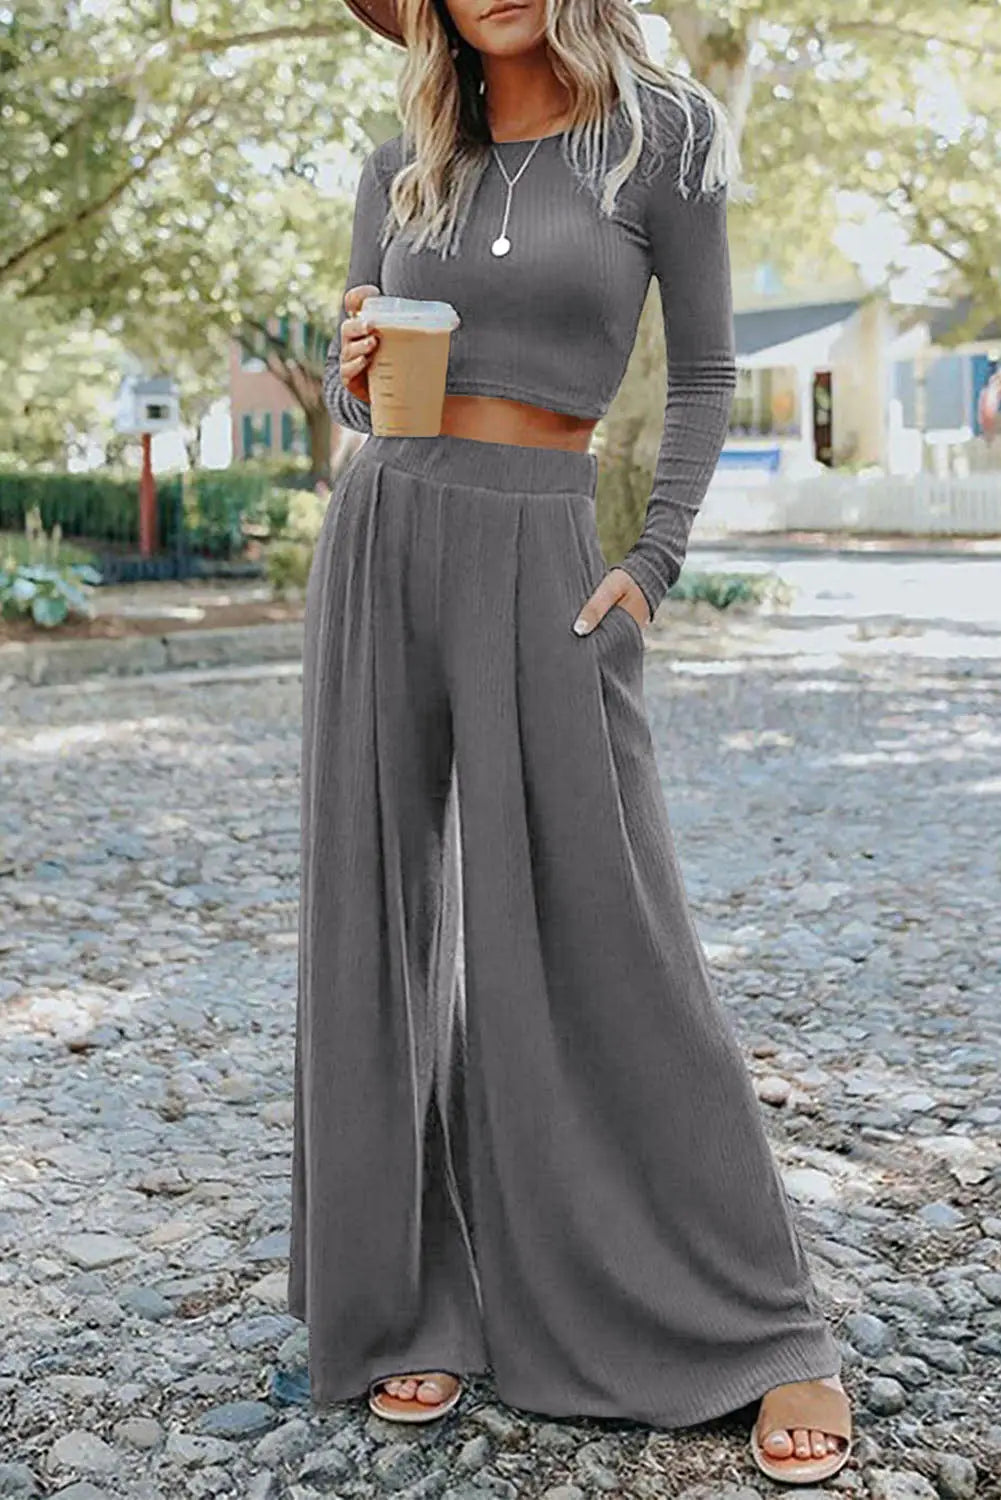 Gray solid color ribbed crop top long pants set - s / 65% polyester + 25% viscose + 10% elastane - loungewear